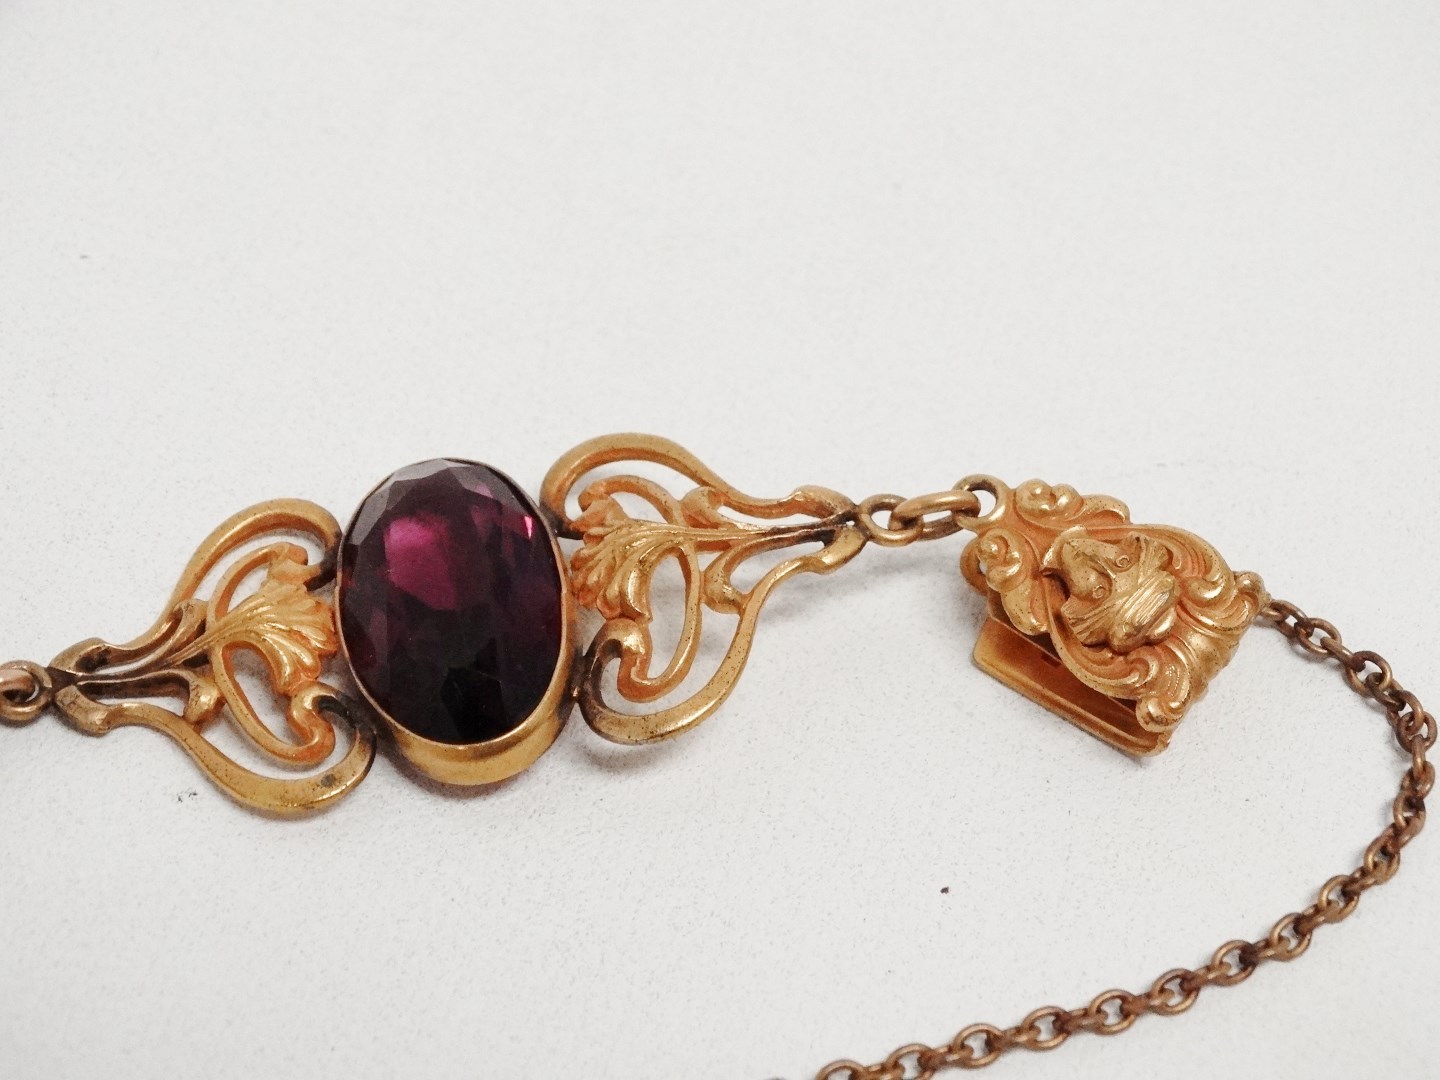 A late 19th century amethyst chatelaine type seal - set in gilt metal, length 10cm. - Image 3 of 3